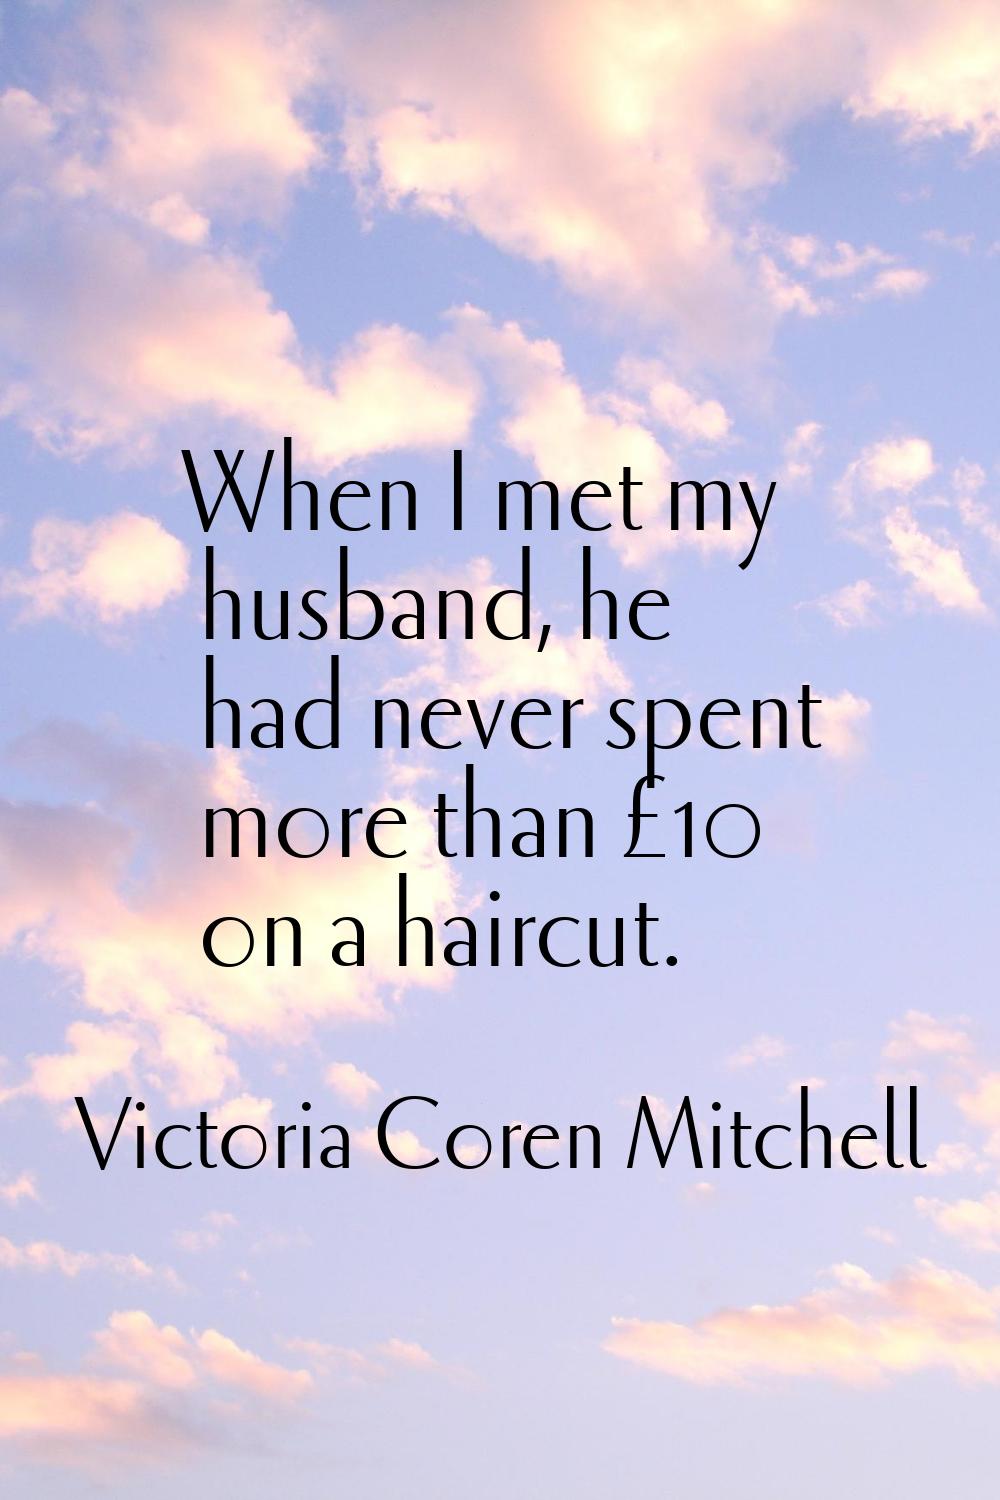 When I met my husband, he had never spent more than £10 on a haircut.